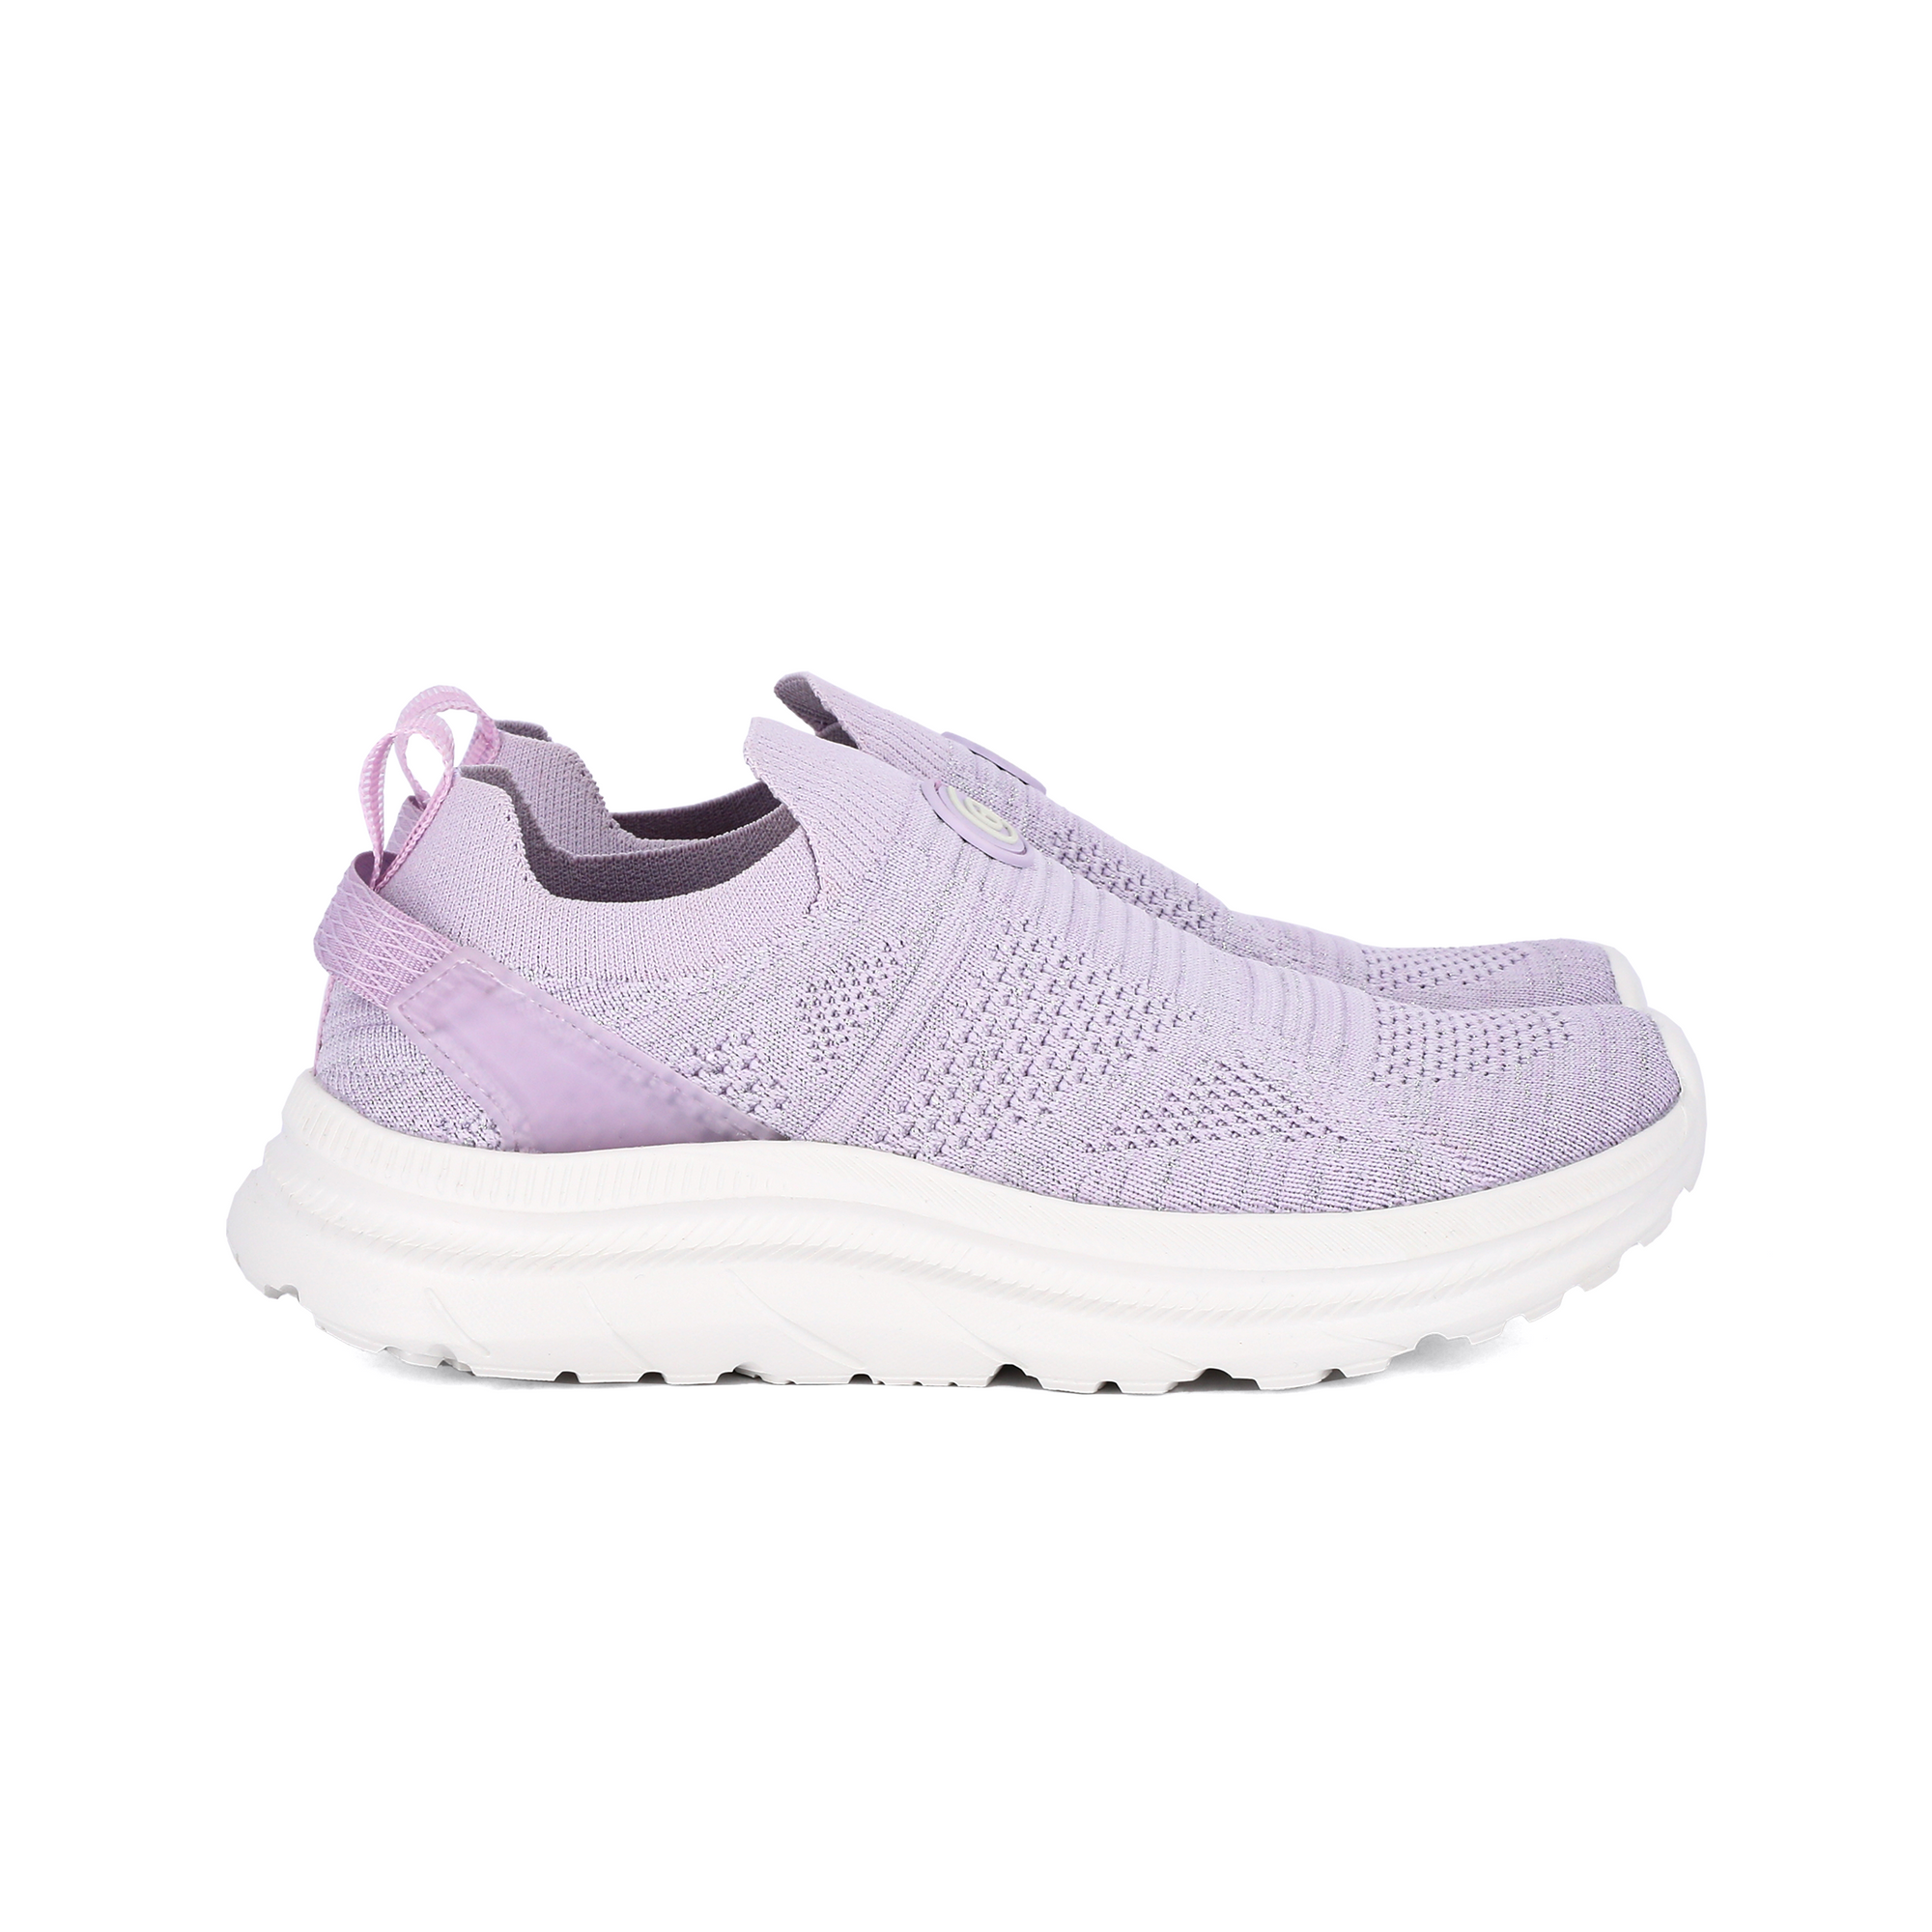 Lilac recycled slip-on sneakers